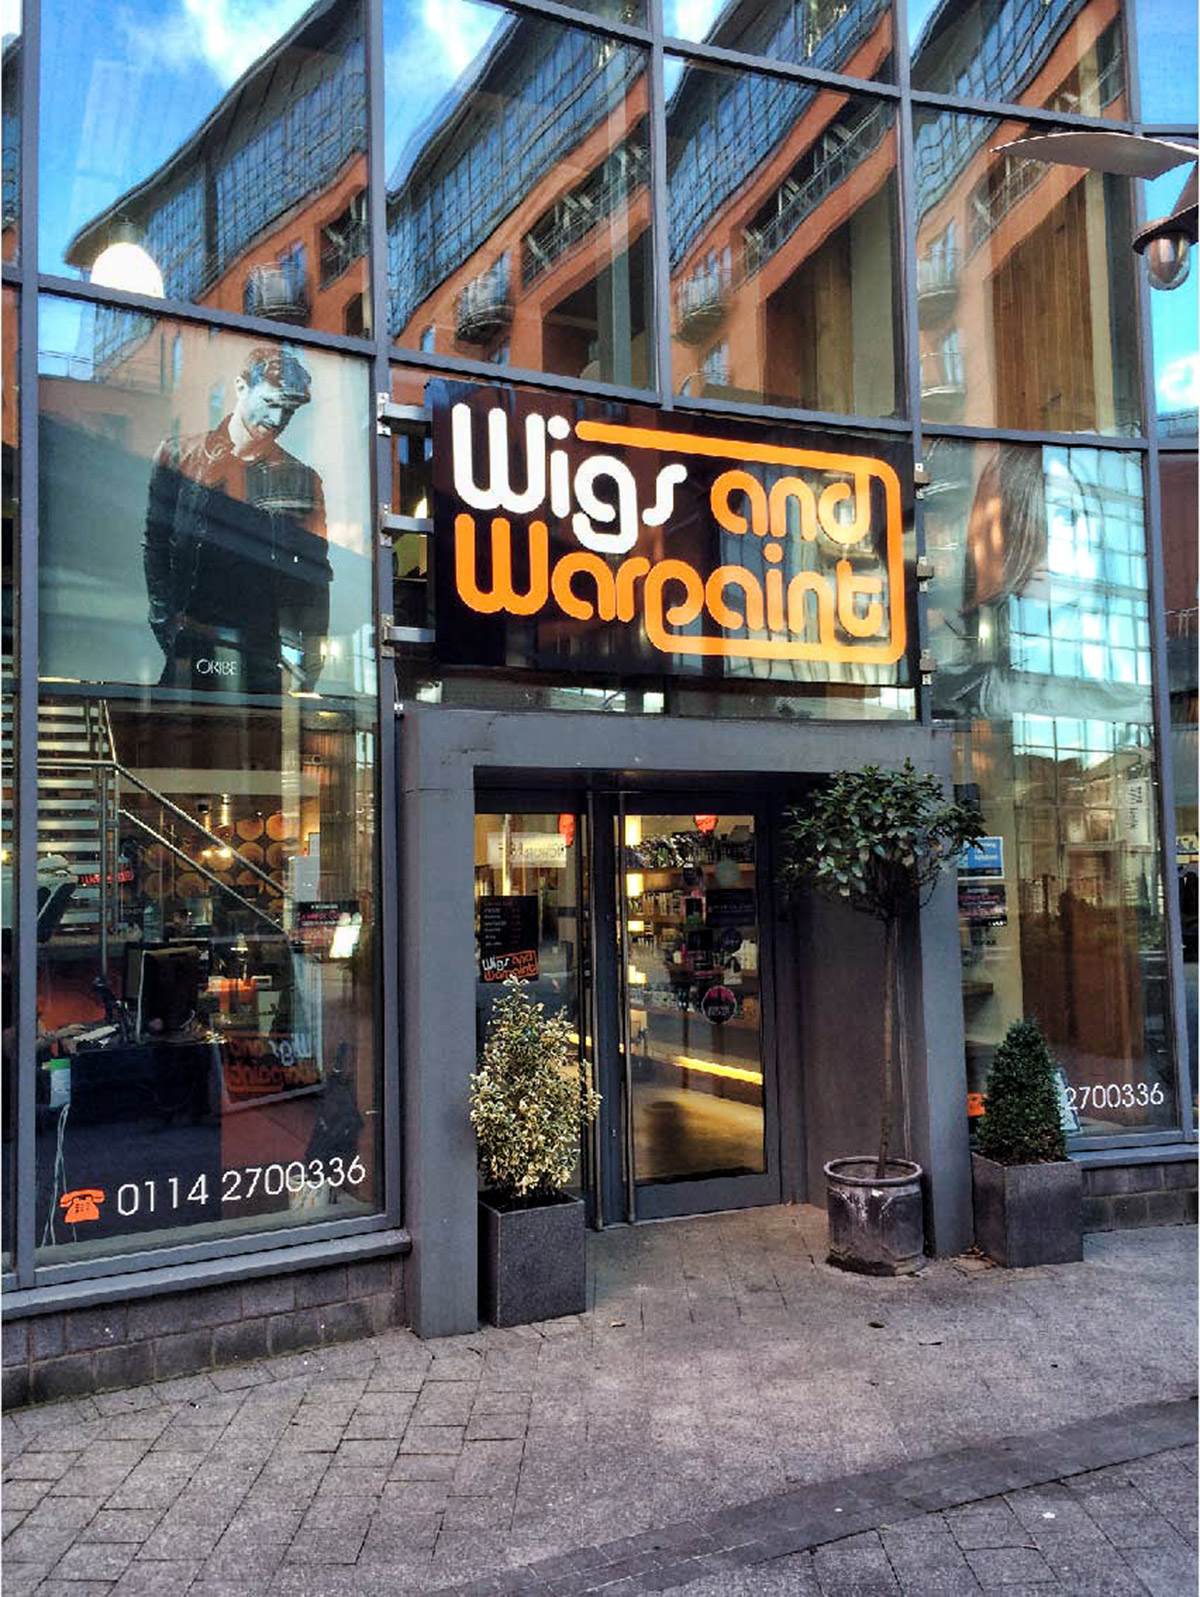 Wigs and Warpaint business sign Sheffield